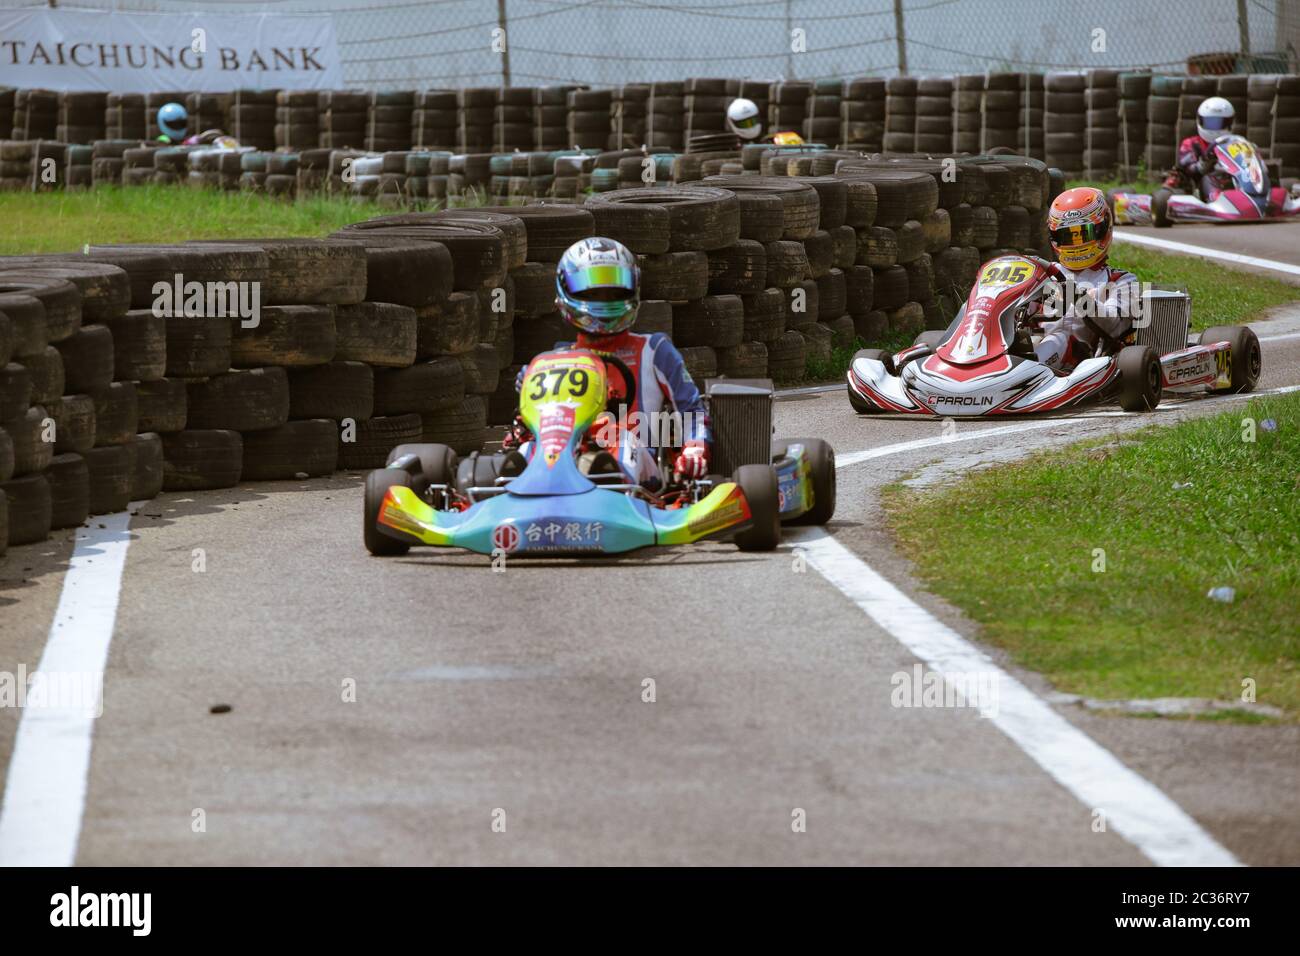 Kart racers zig-zaging into the pit stop zone after the race finish. Stock Photo